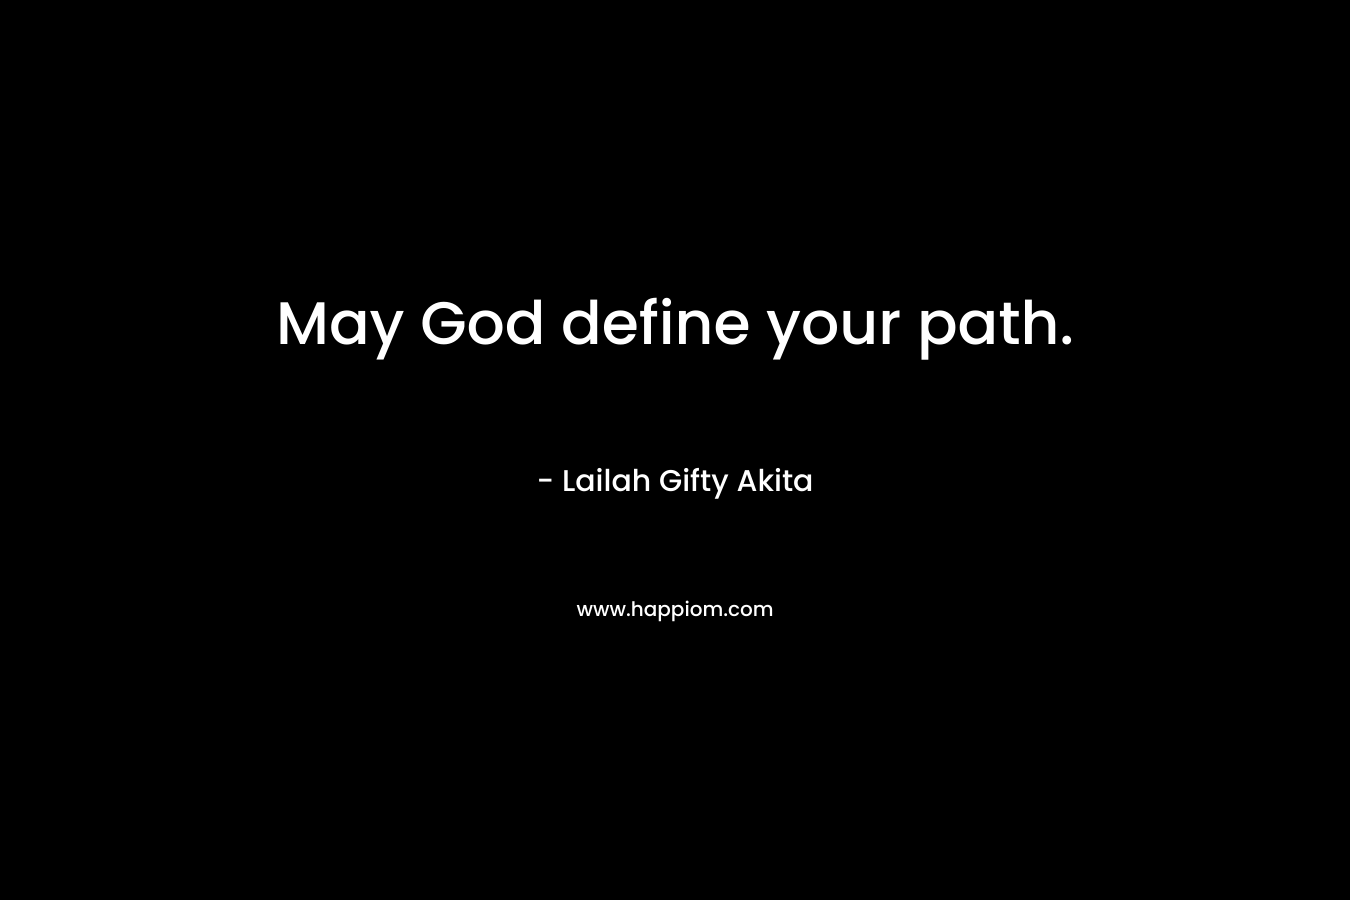 May God define your path.